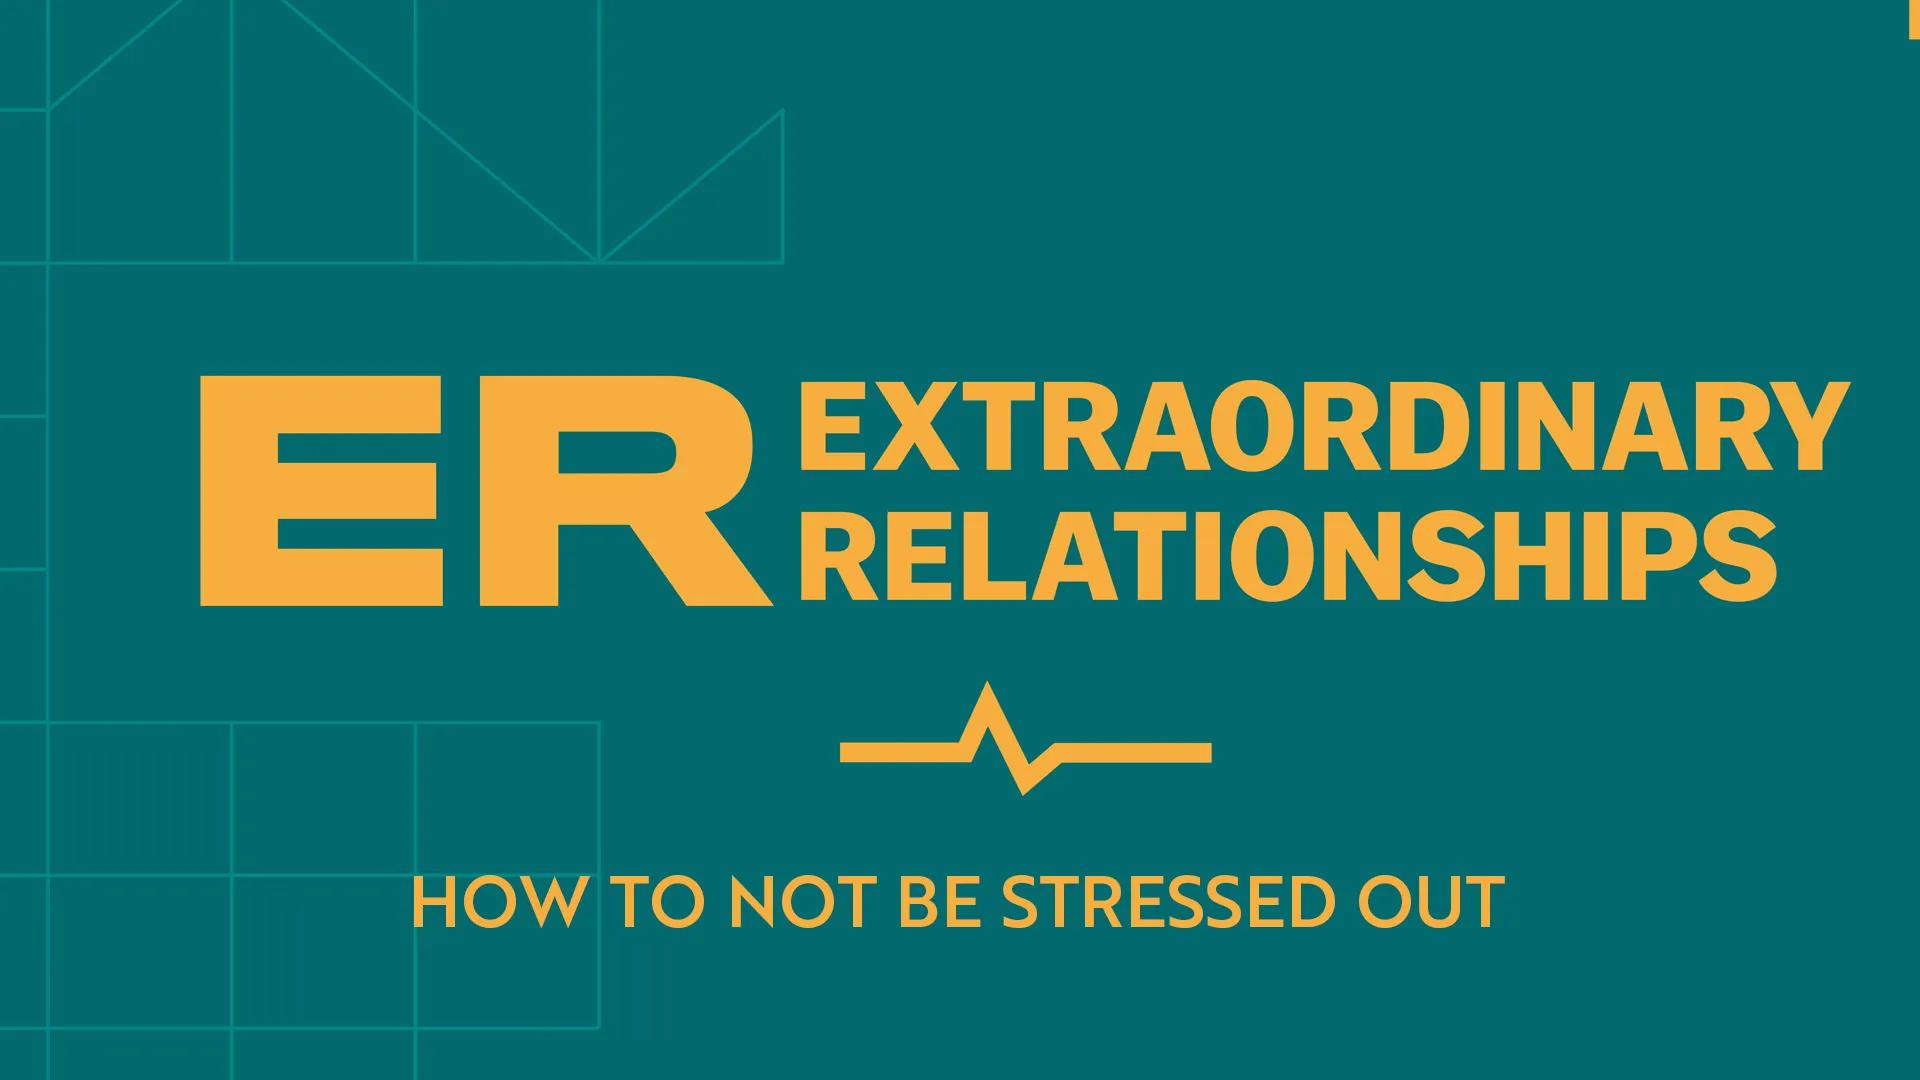 A teal background with yellow words that say "extraordinary relationship" and "how to not be stressed out"